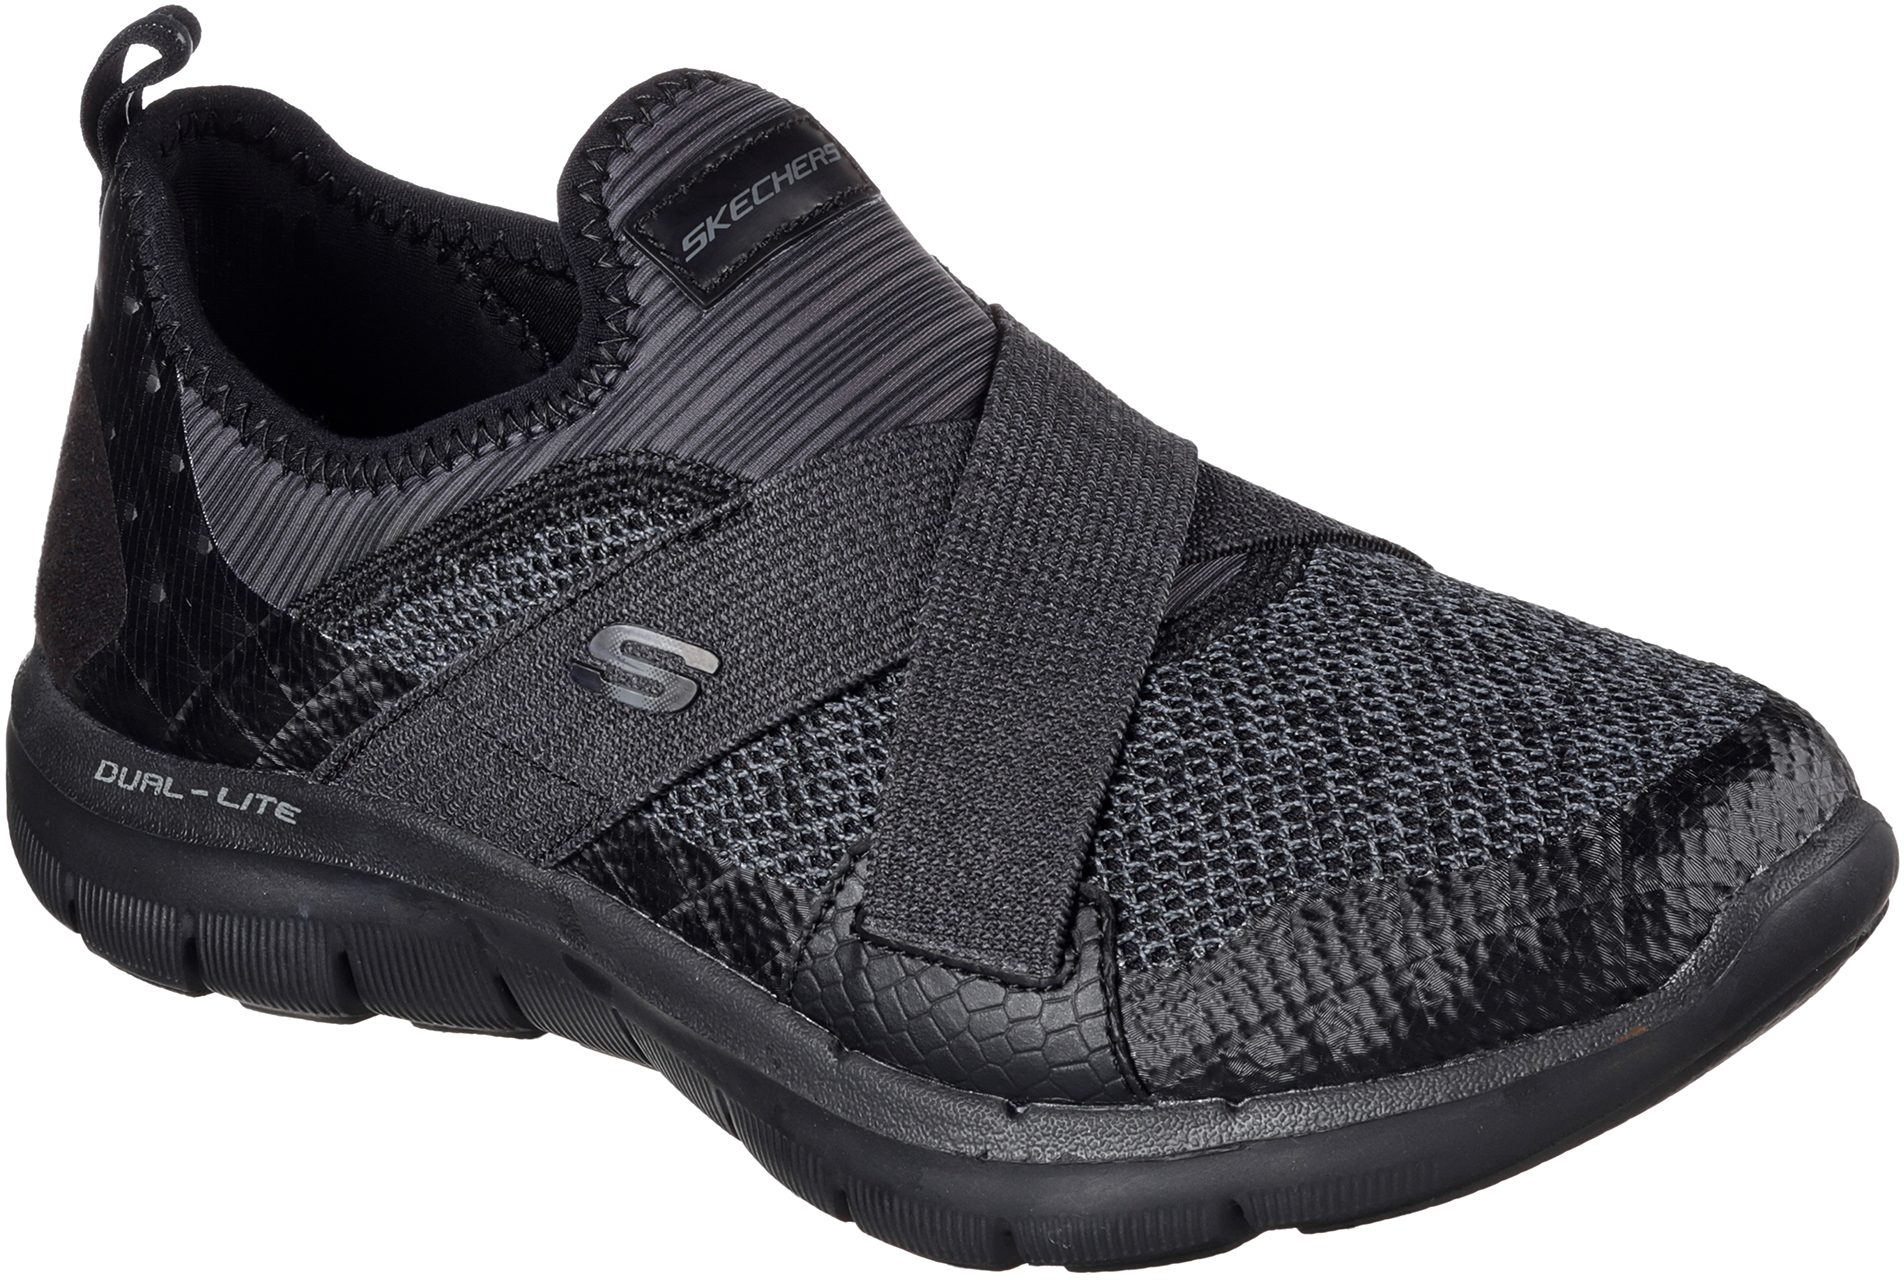 Skechers Appeal 2.0 - New Image Black 12752 - Womens Trainers - Humphries Shoes